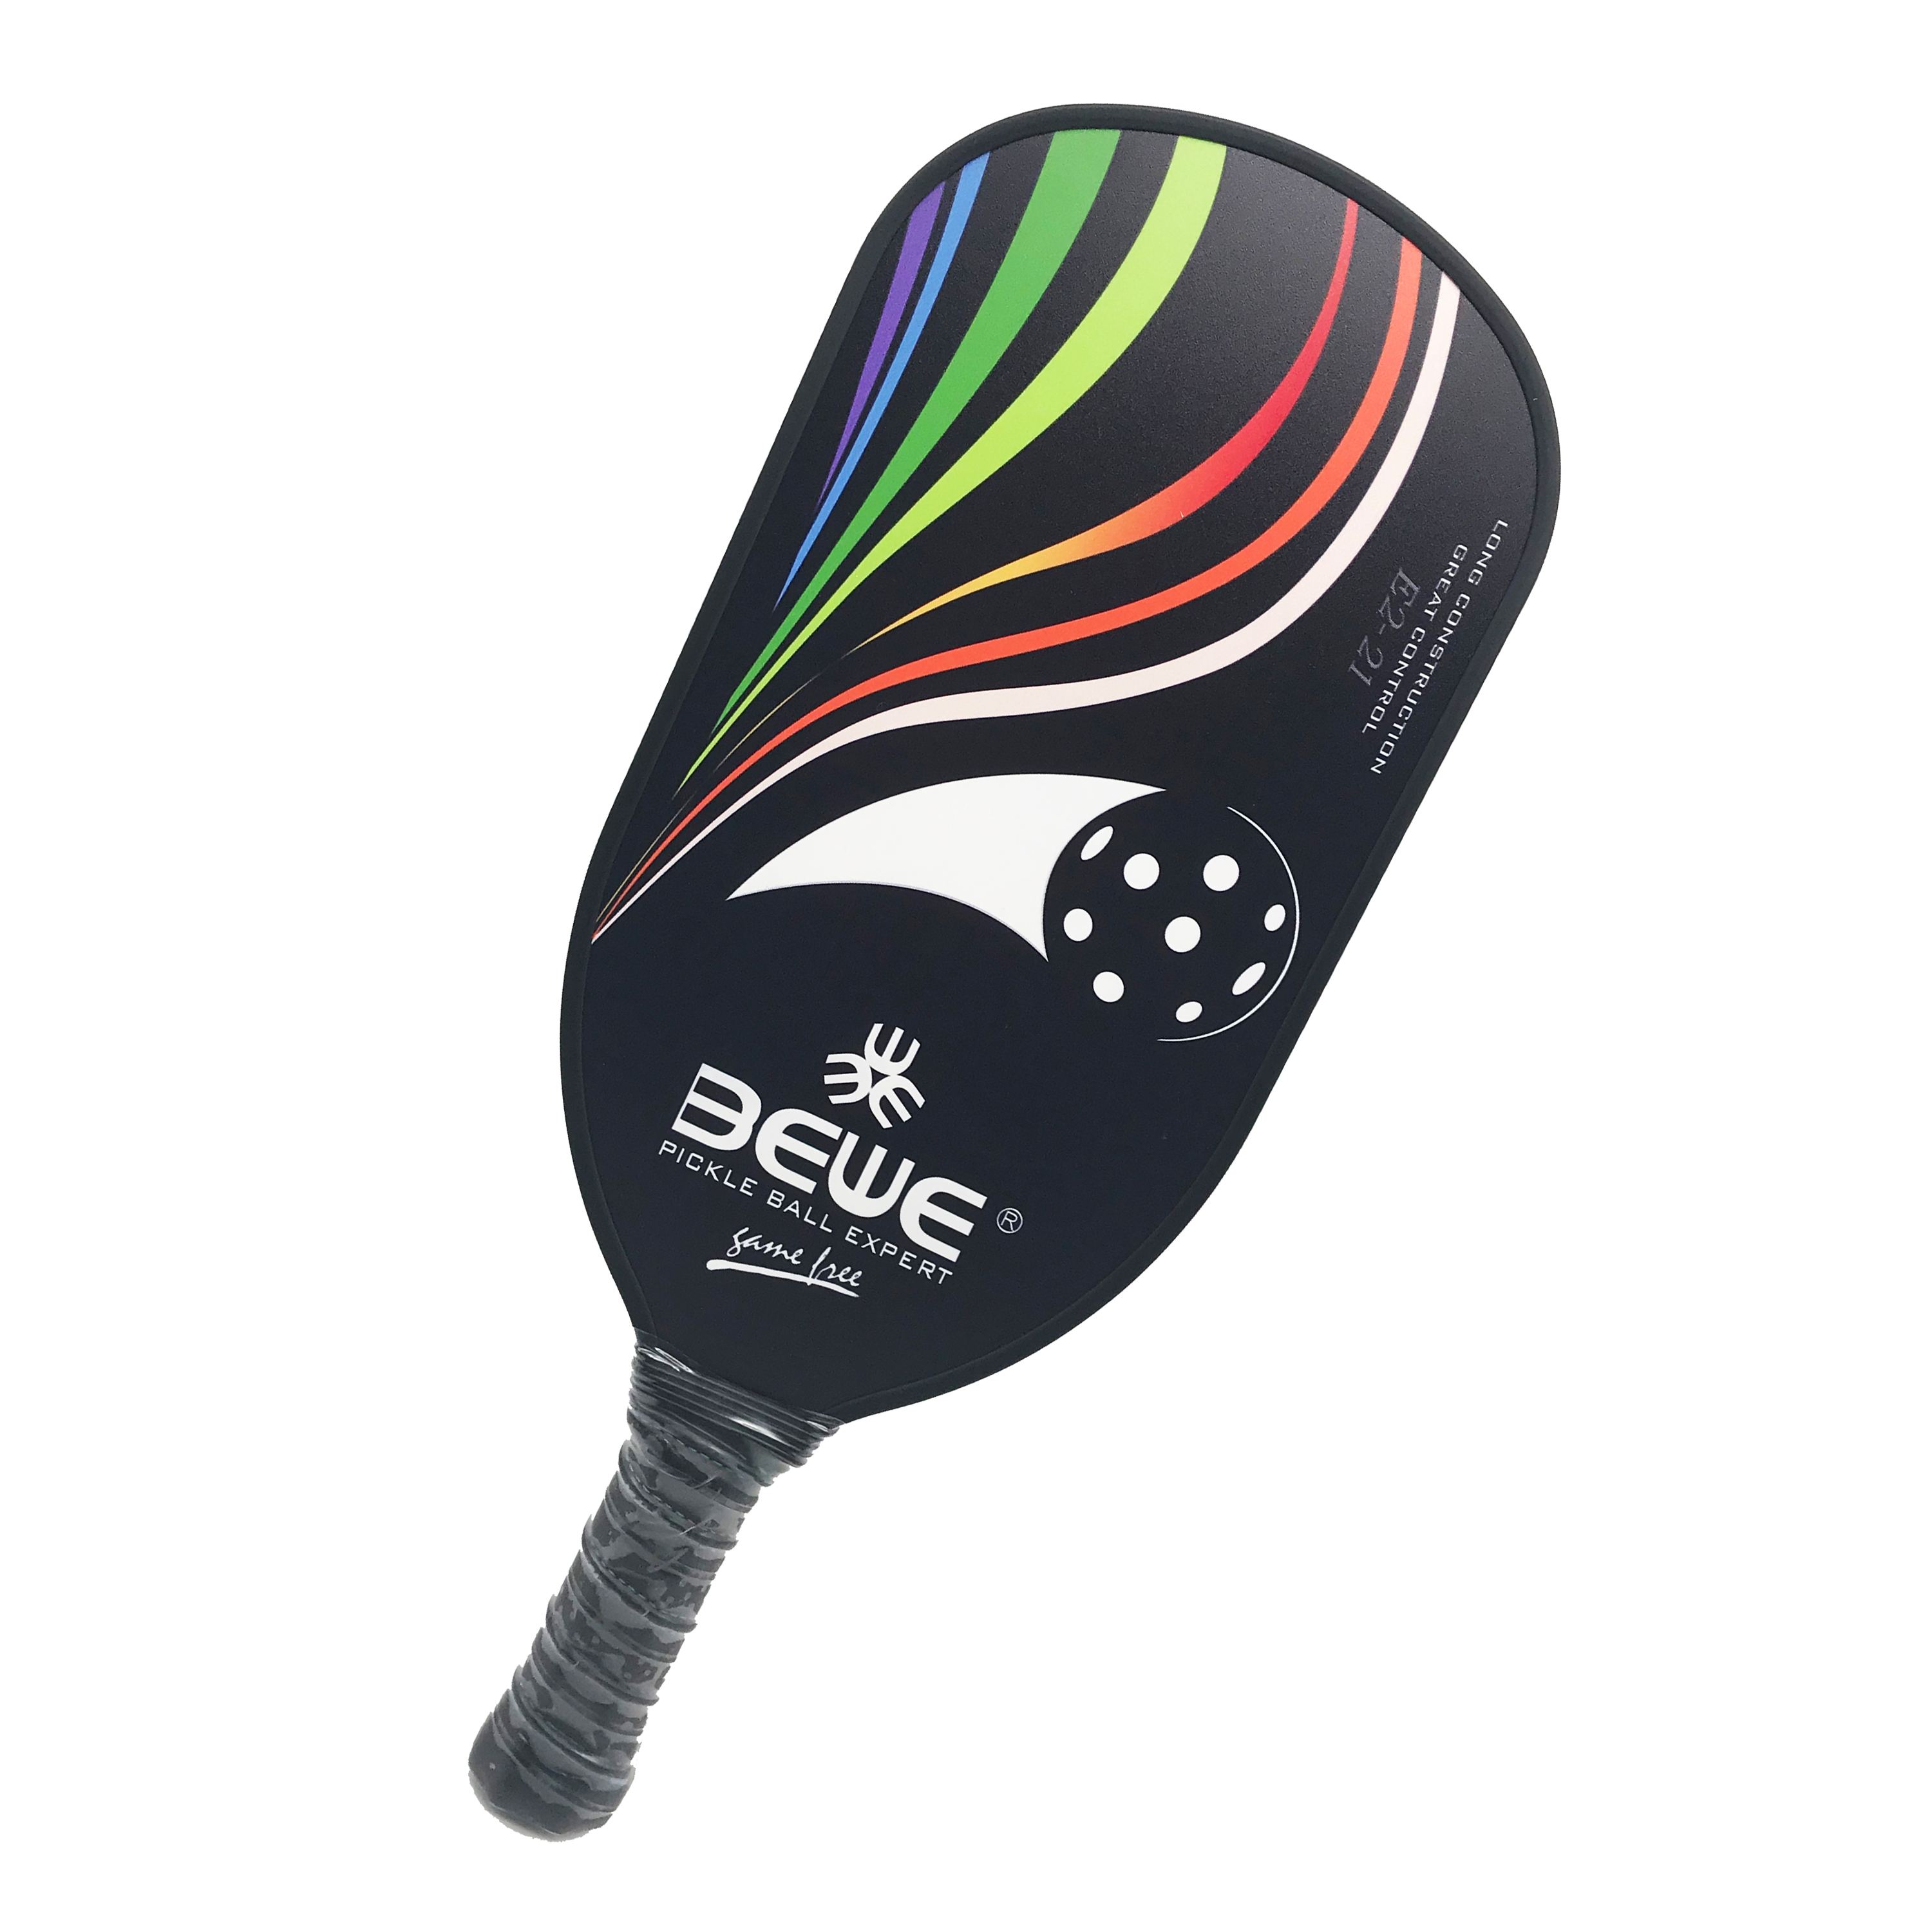 Free Shipping Fast Delivery USAPA Carbon Fiber Graphite Pickleball Paddle